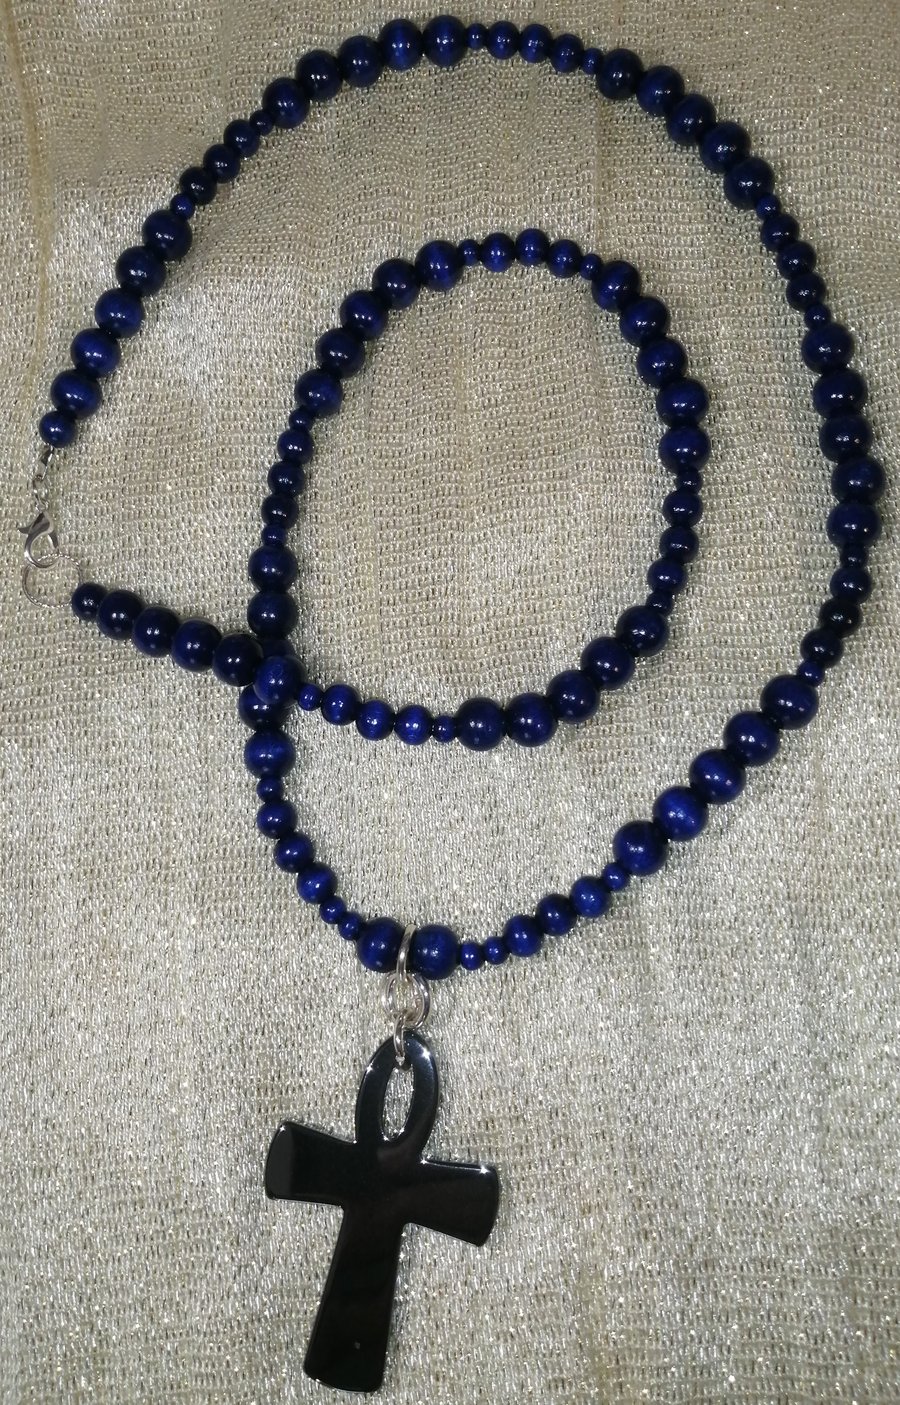 Haematite Crystal Ankh and Blue Polished Wooden African Beads Necklace